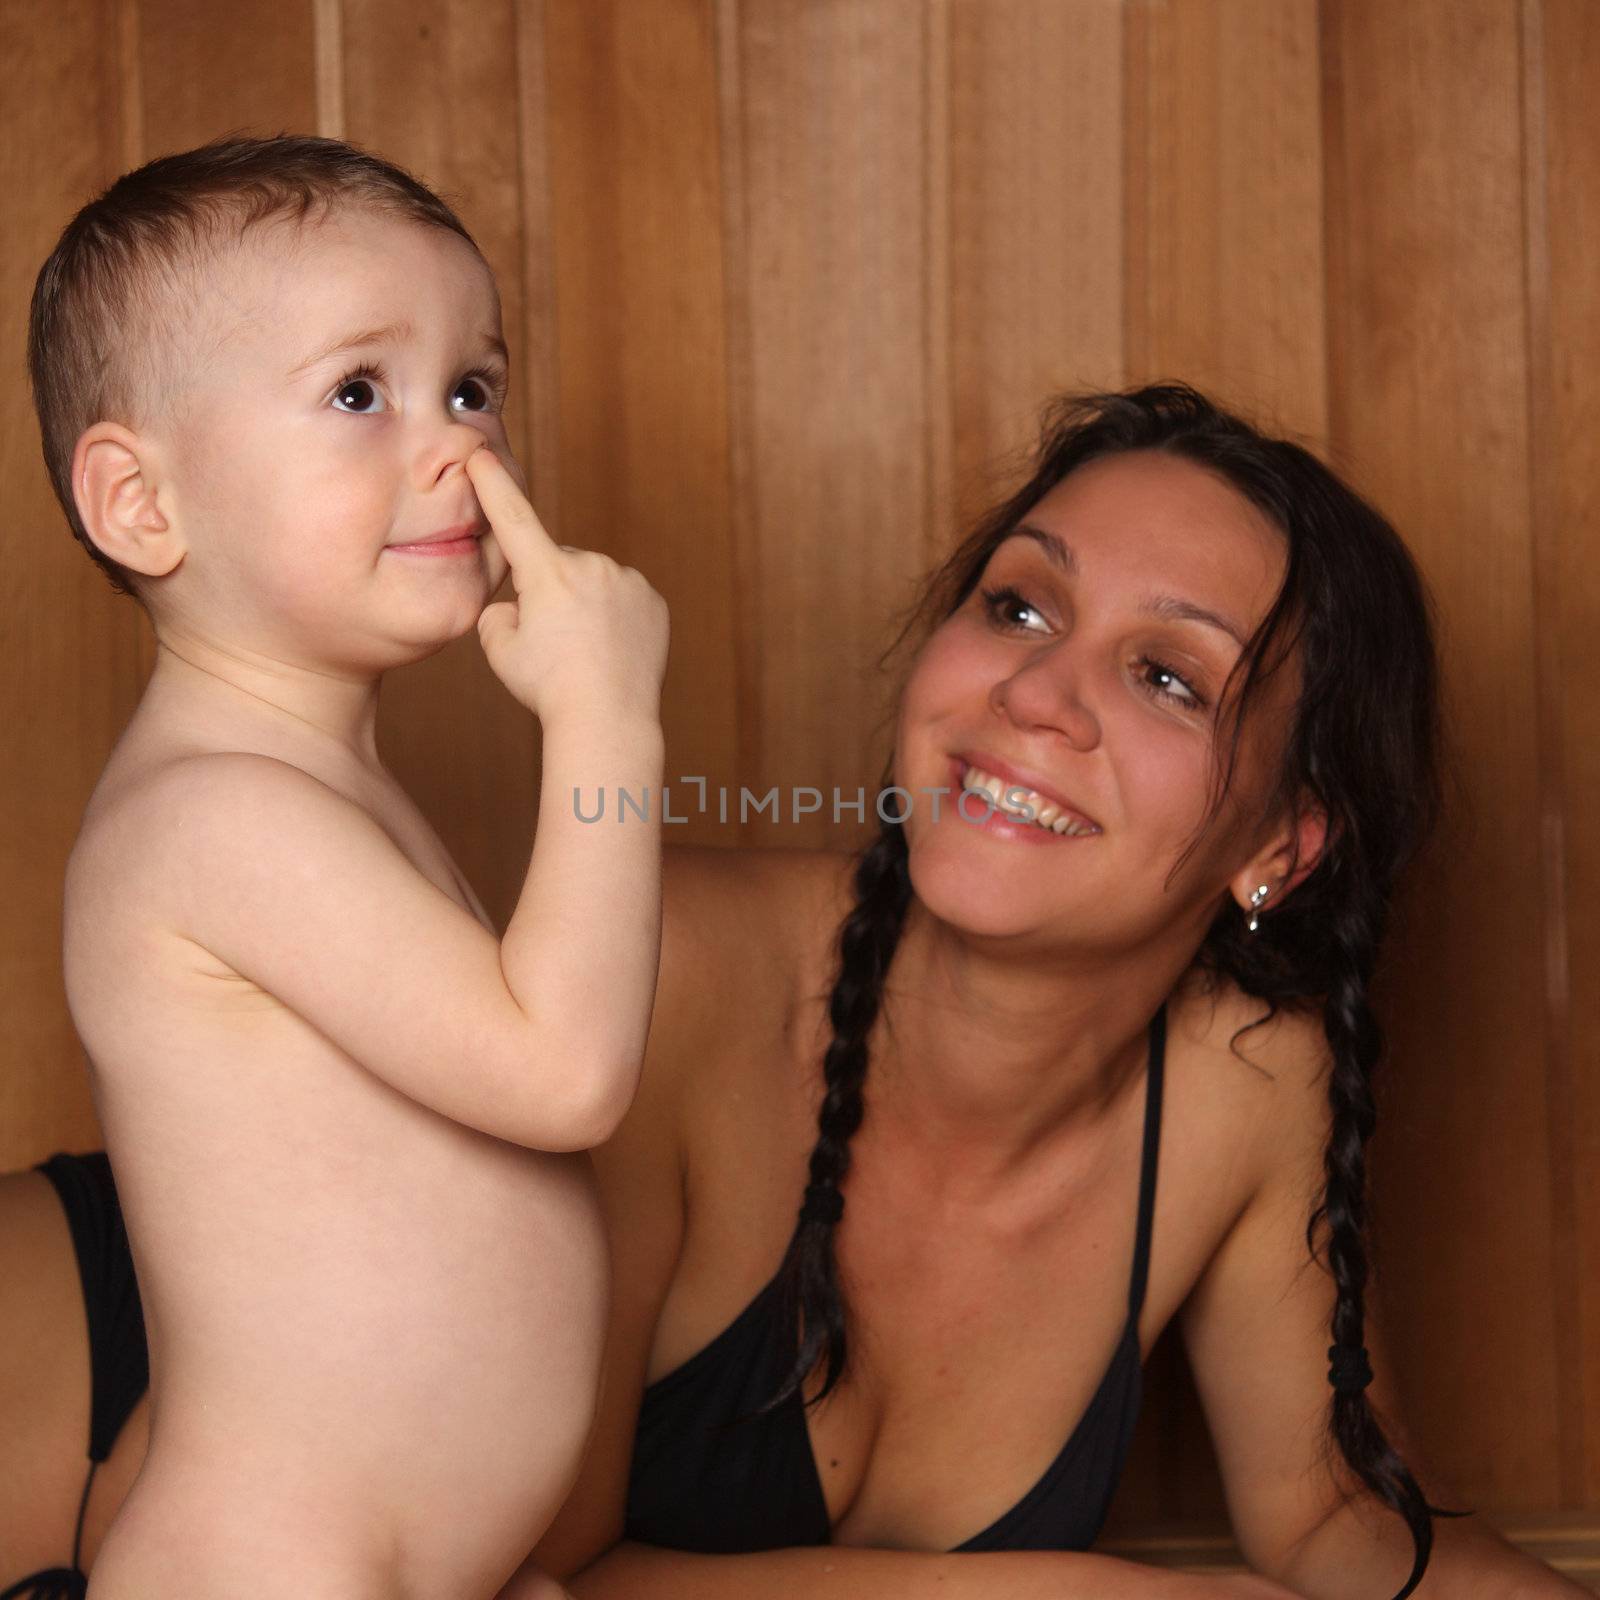 Mum with the small son are heated in a sauna
